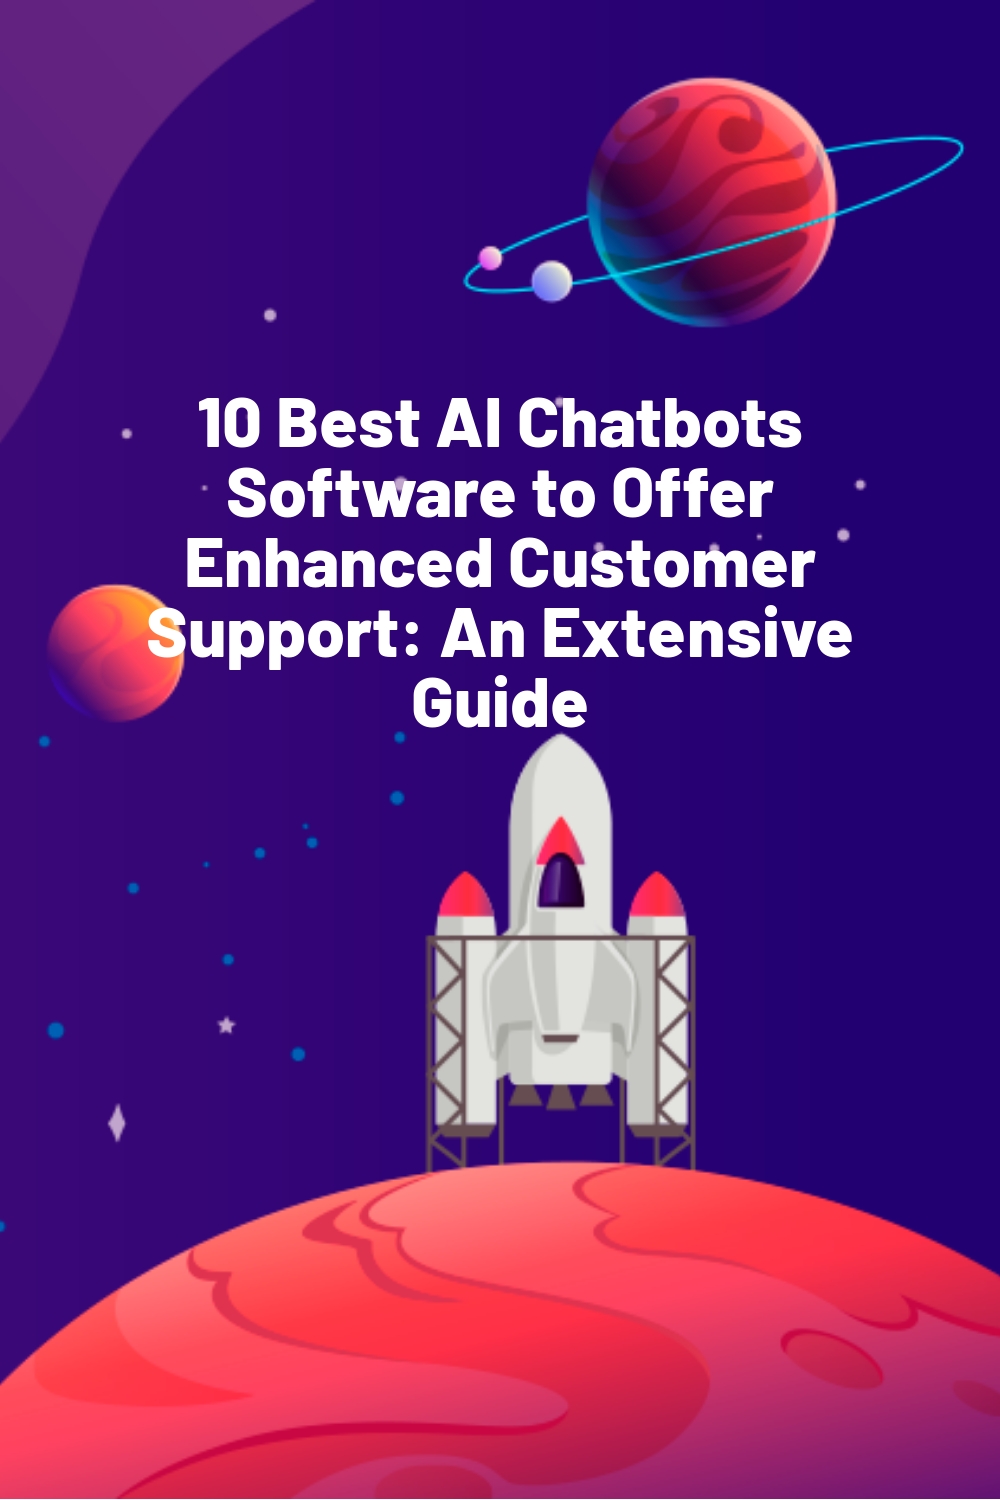 10 Best AI Chatbots Software to Offer Enhanced Customer Support: An Extensive Guide